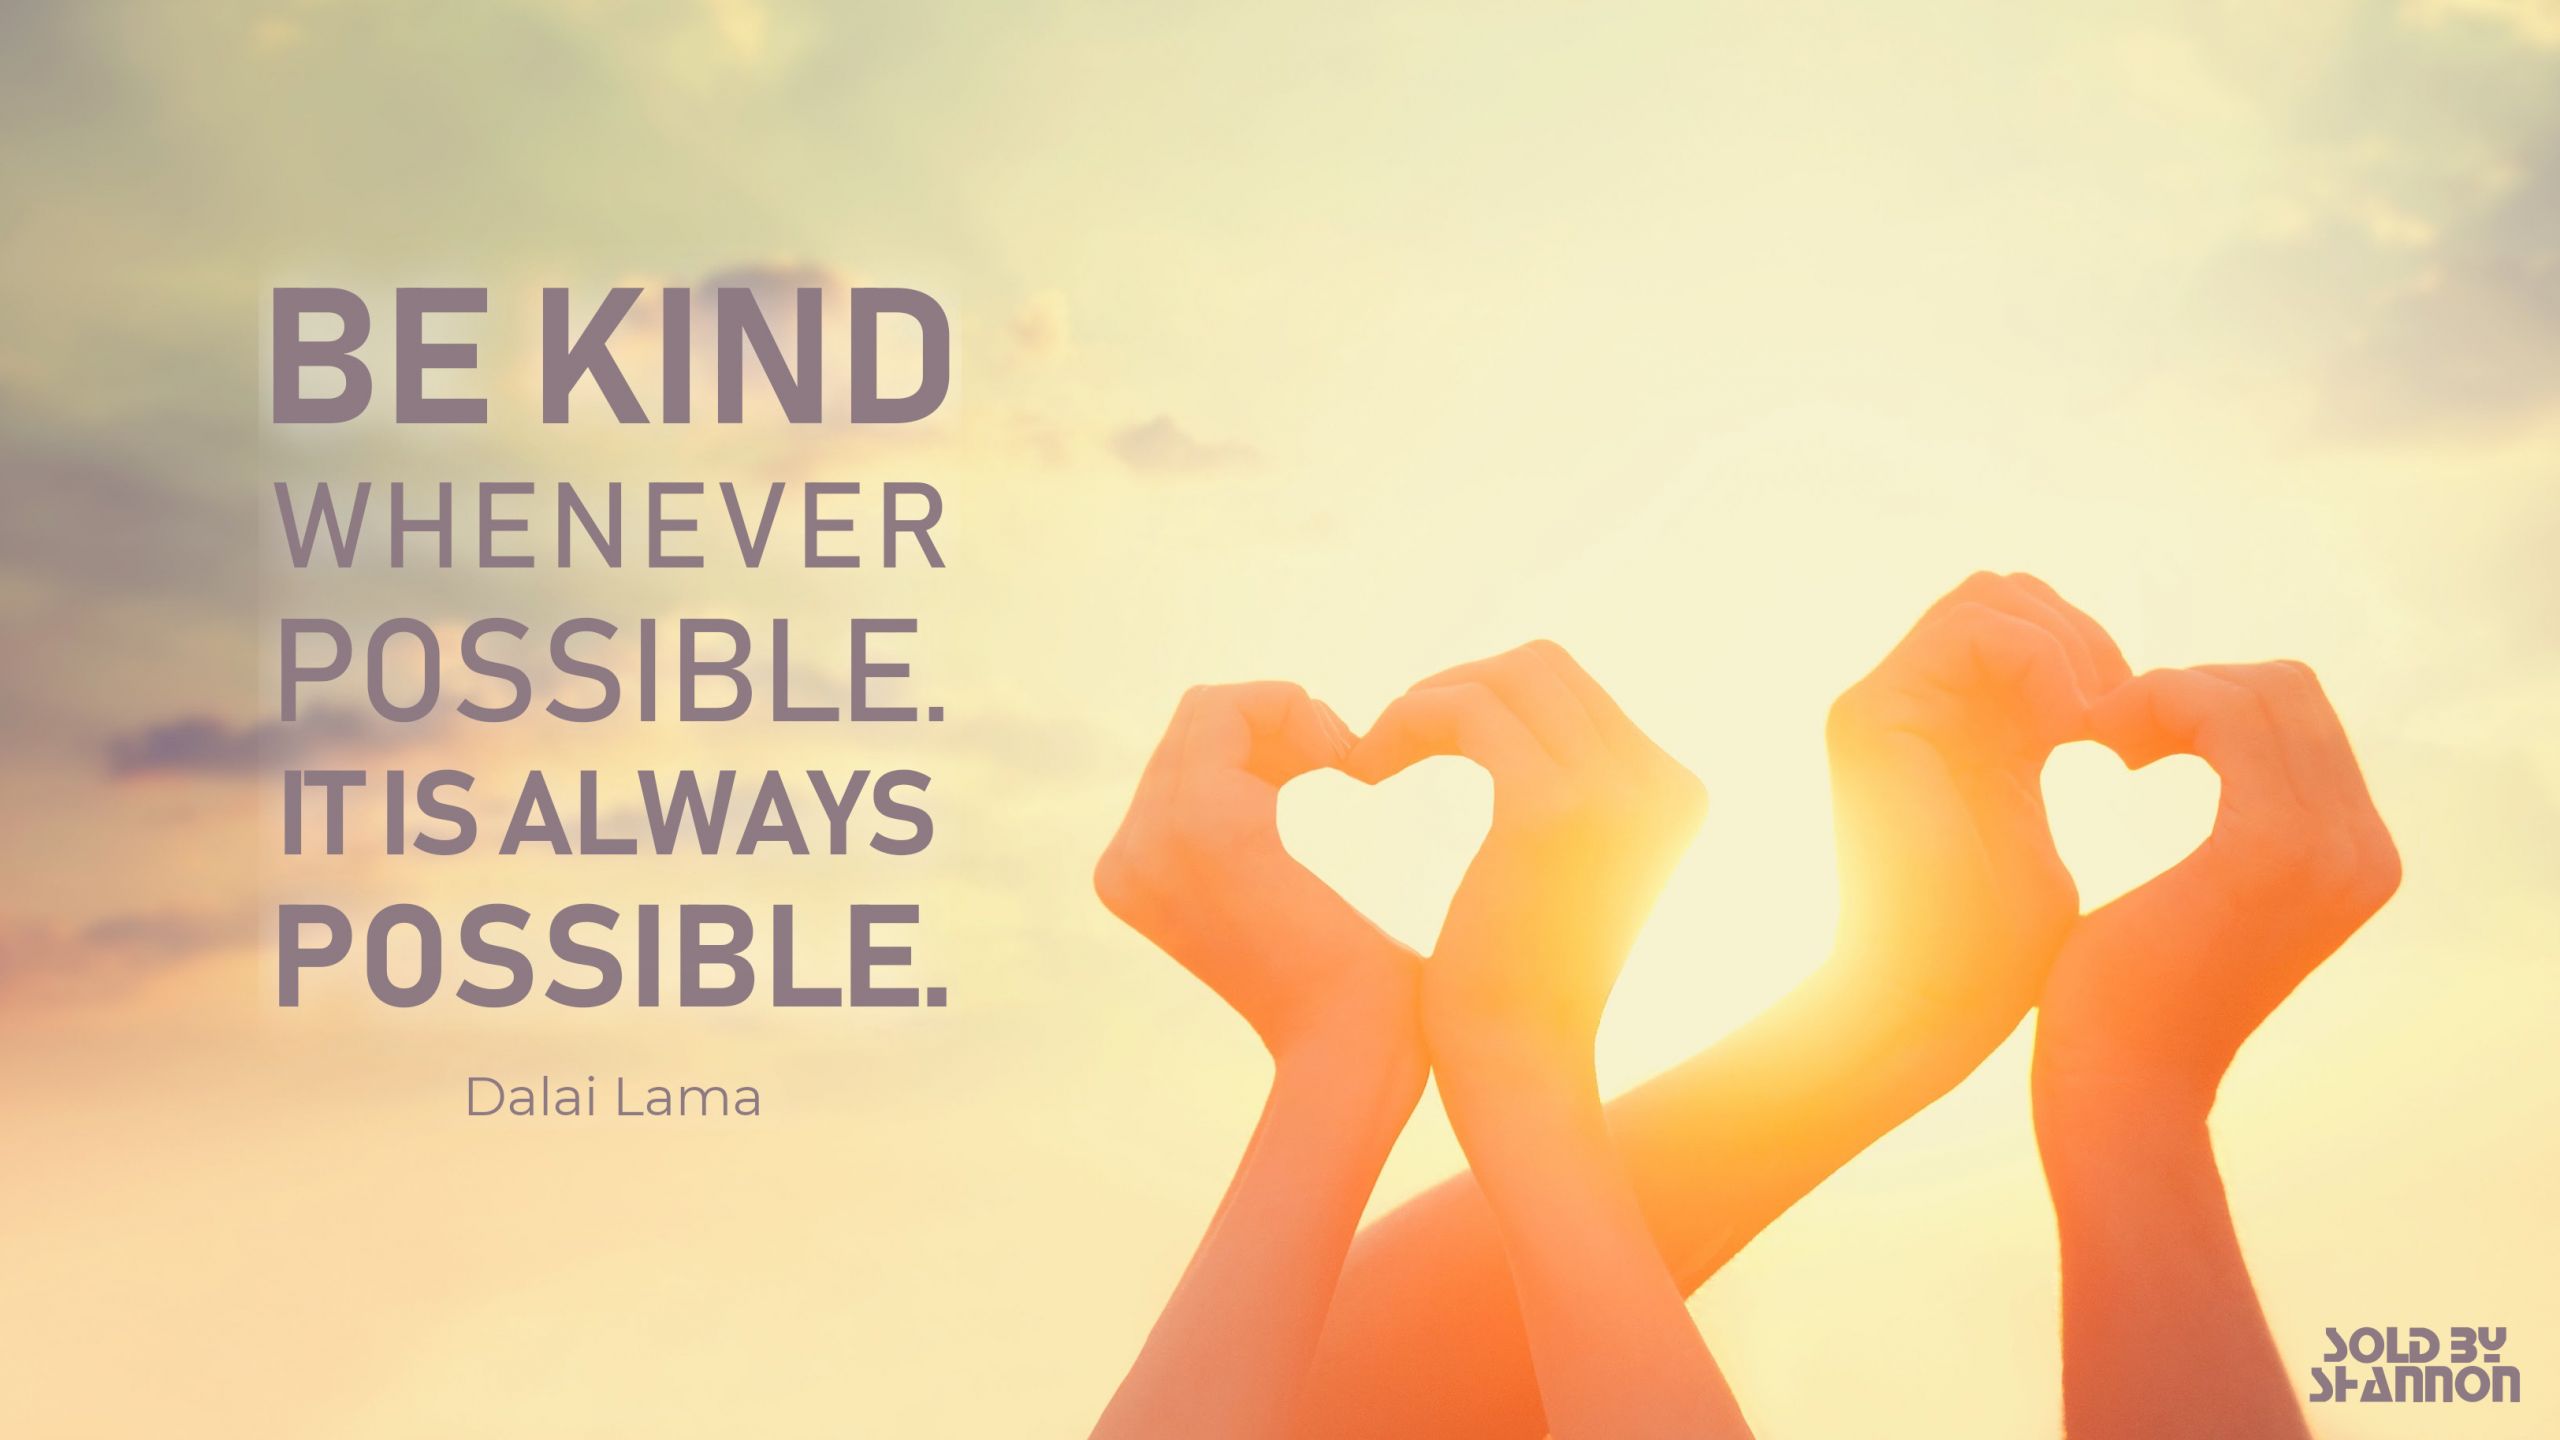 Kindness Quotes Dalai Lama
 Kindness is the best policy